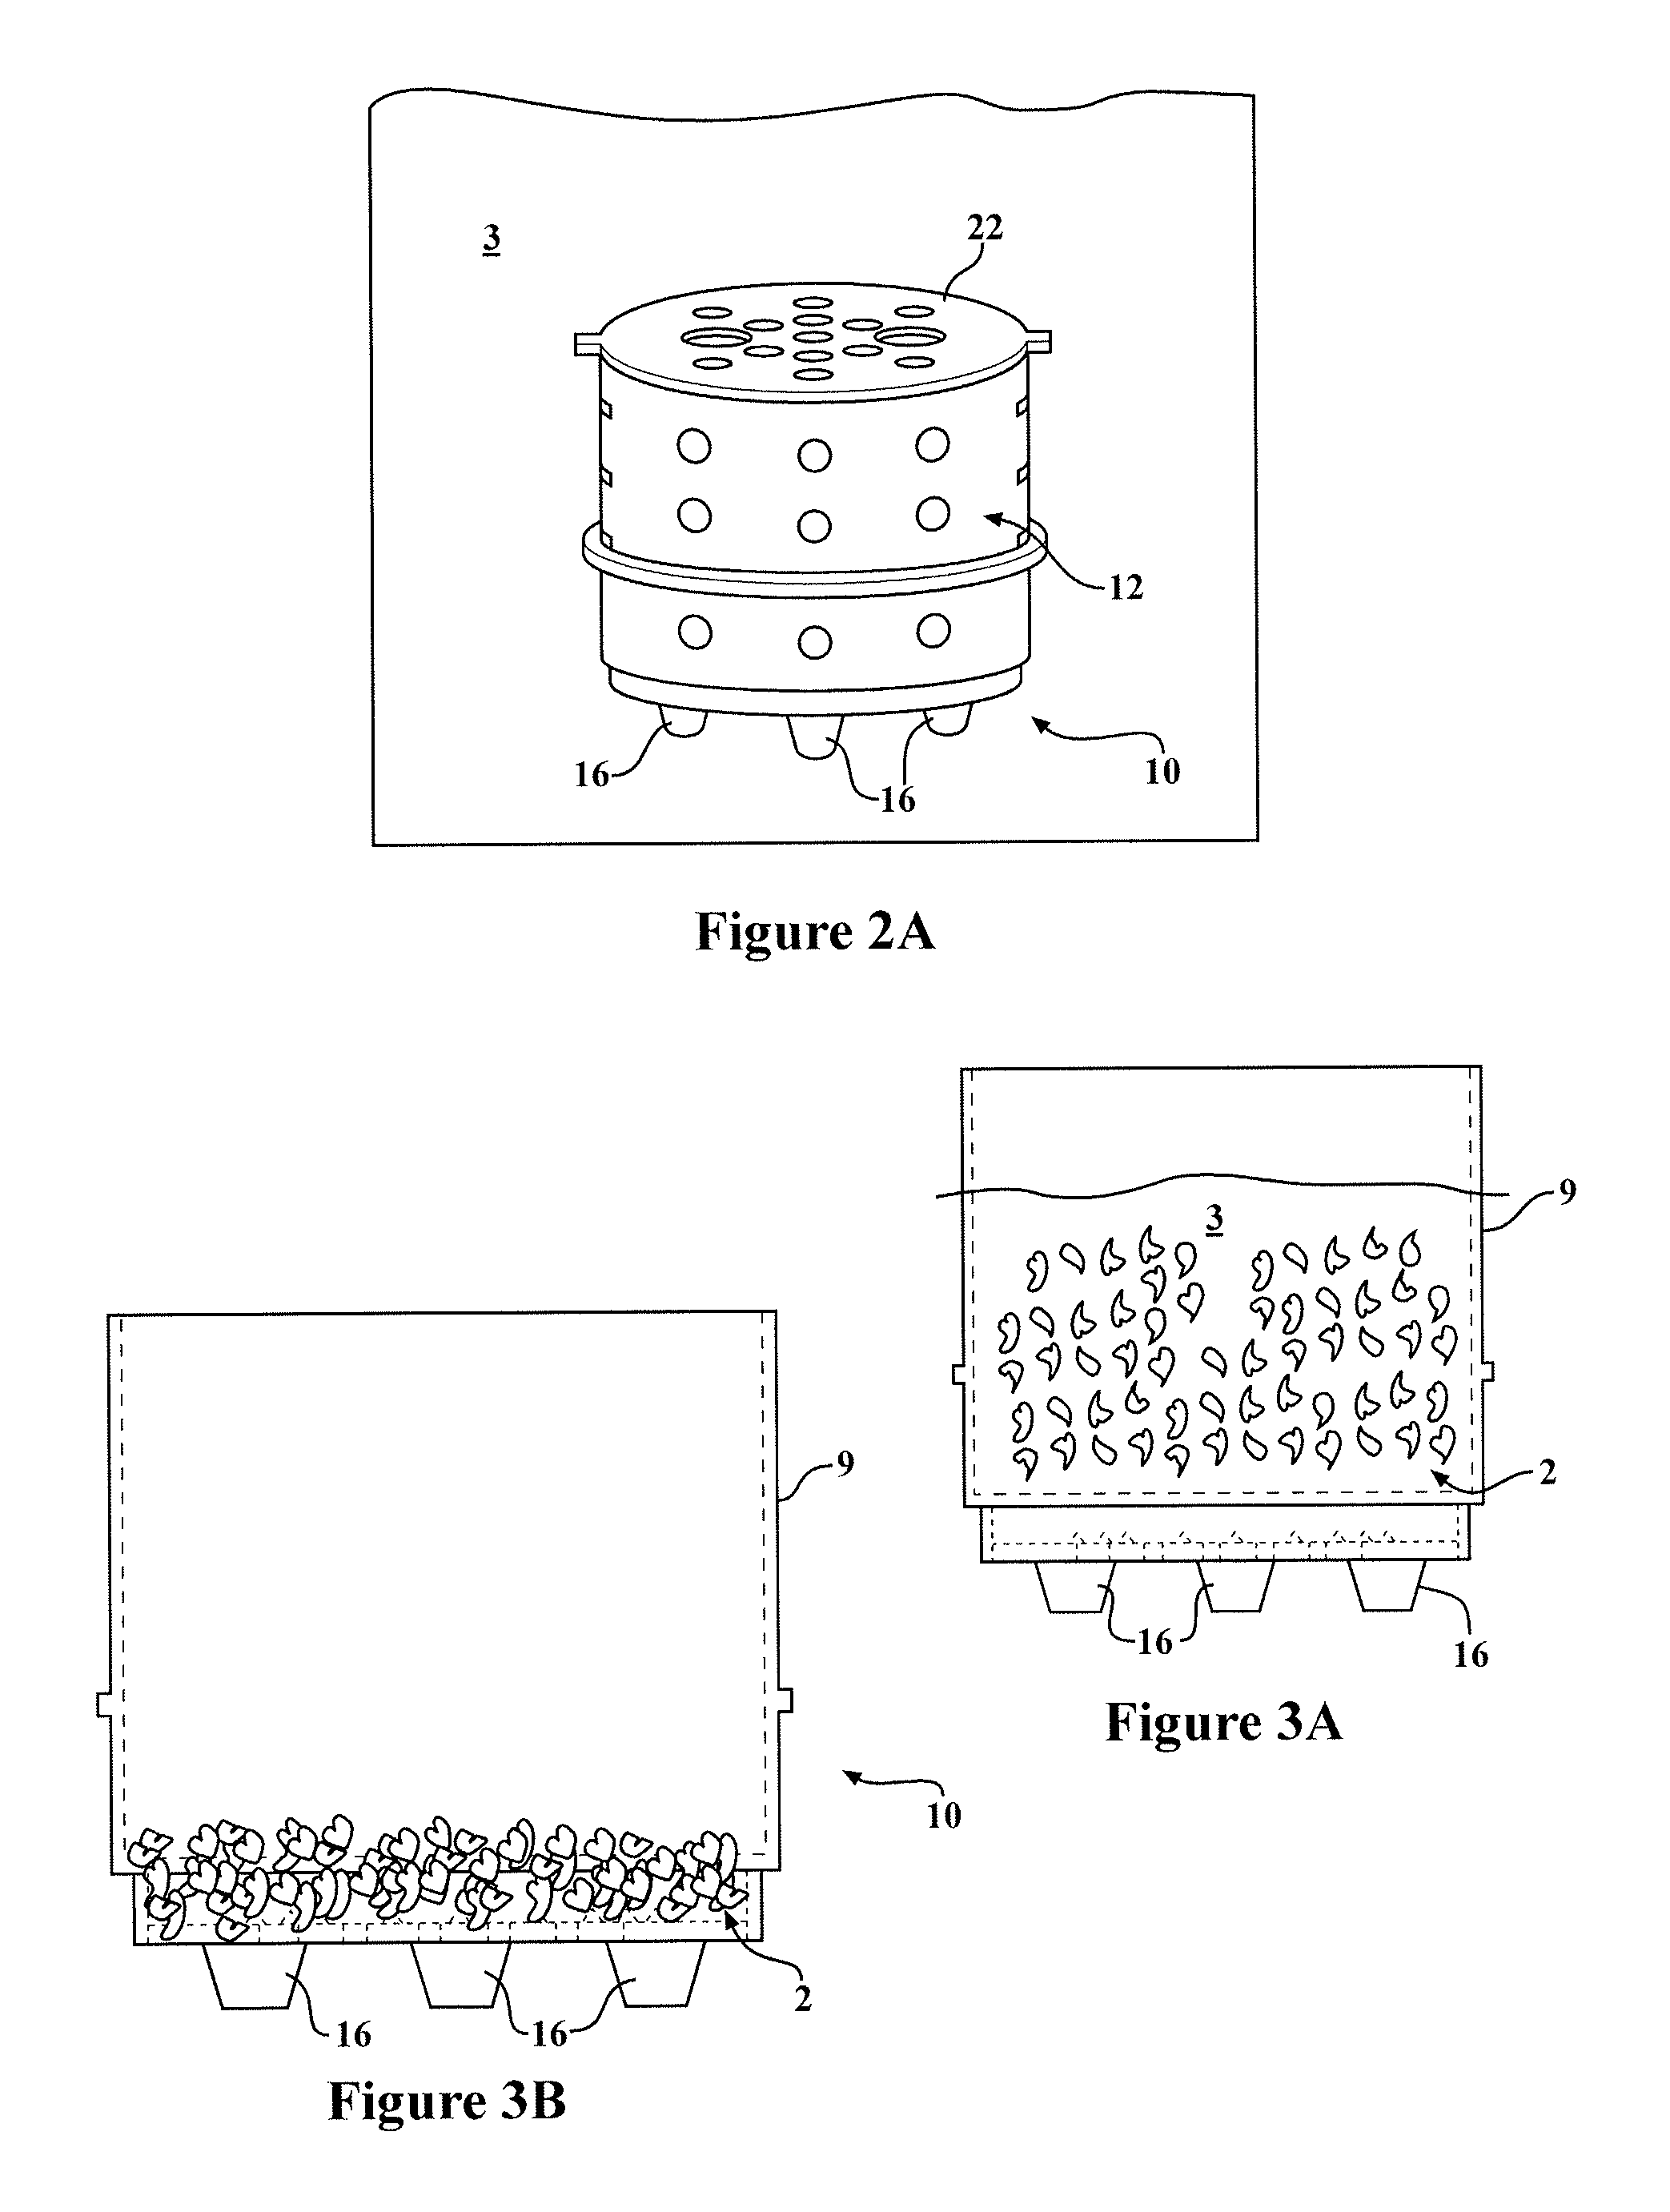 Method and apparatus for soaking and draining wood chips or chunks